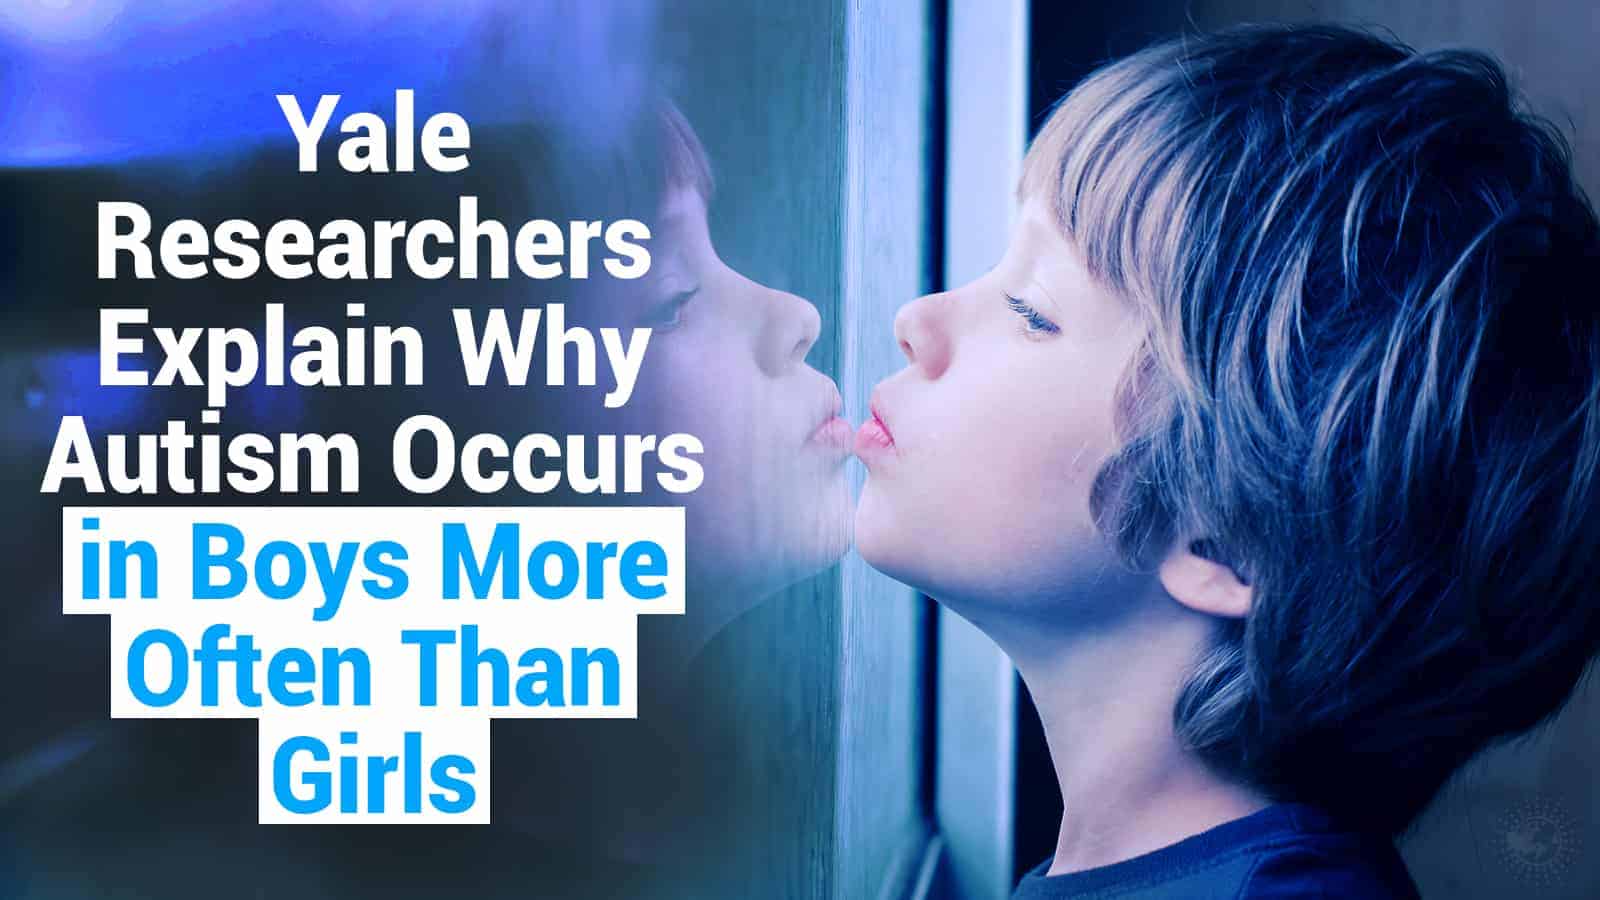 Yale Researchers Explain Why Autism Occurs in Boys More Than Girls